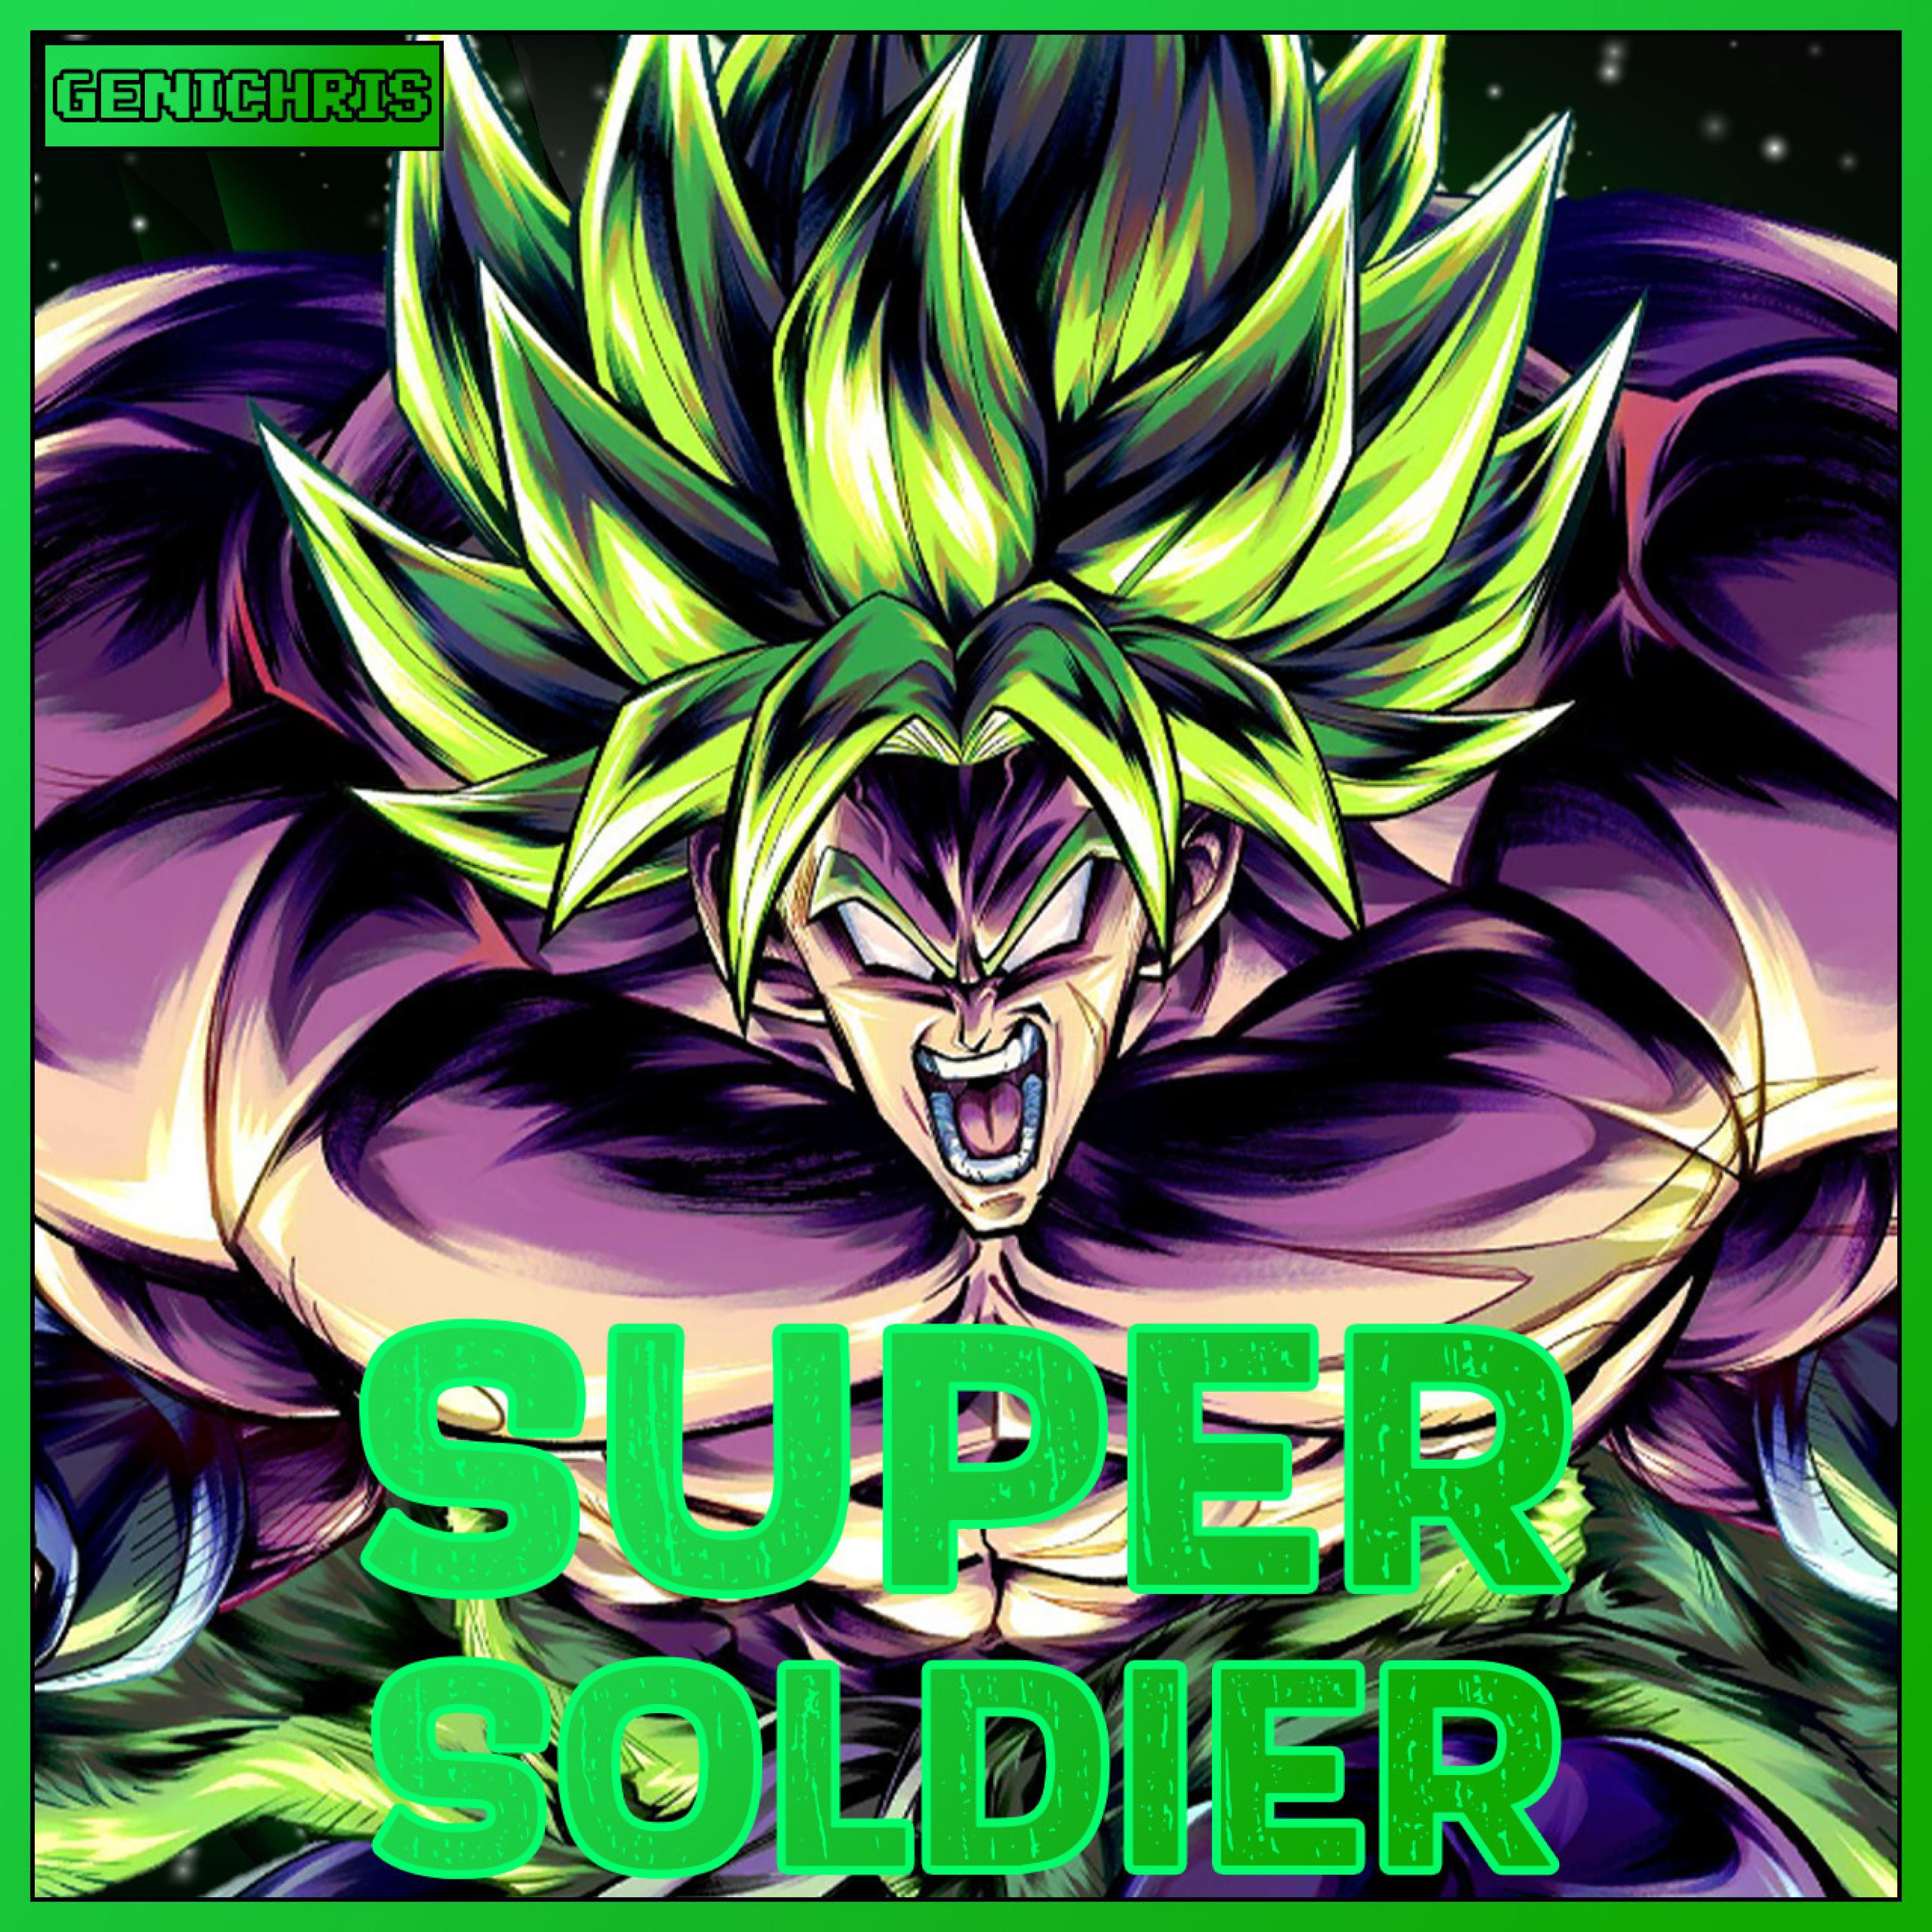 Genichris - Super Soldier (Broly Rap) (feat. Fr0sted & Pure chAos Music)